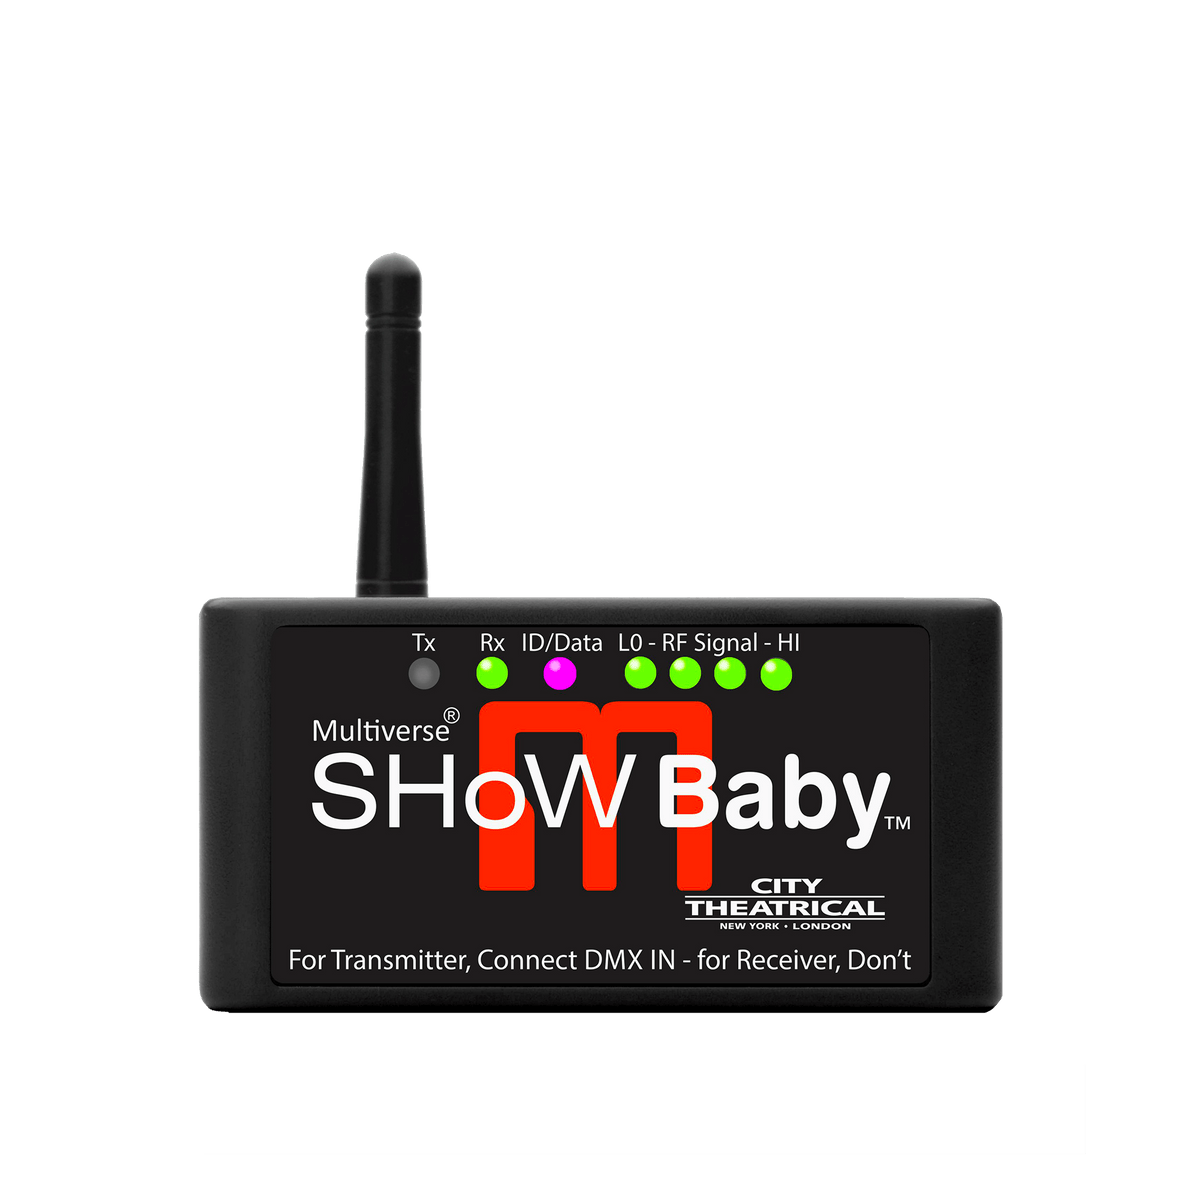 City Theatrical SHoW Baby Multiverse Wireless DMX